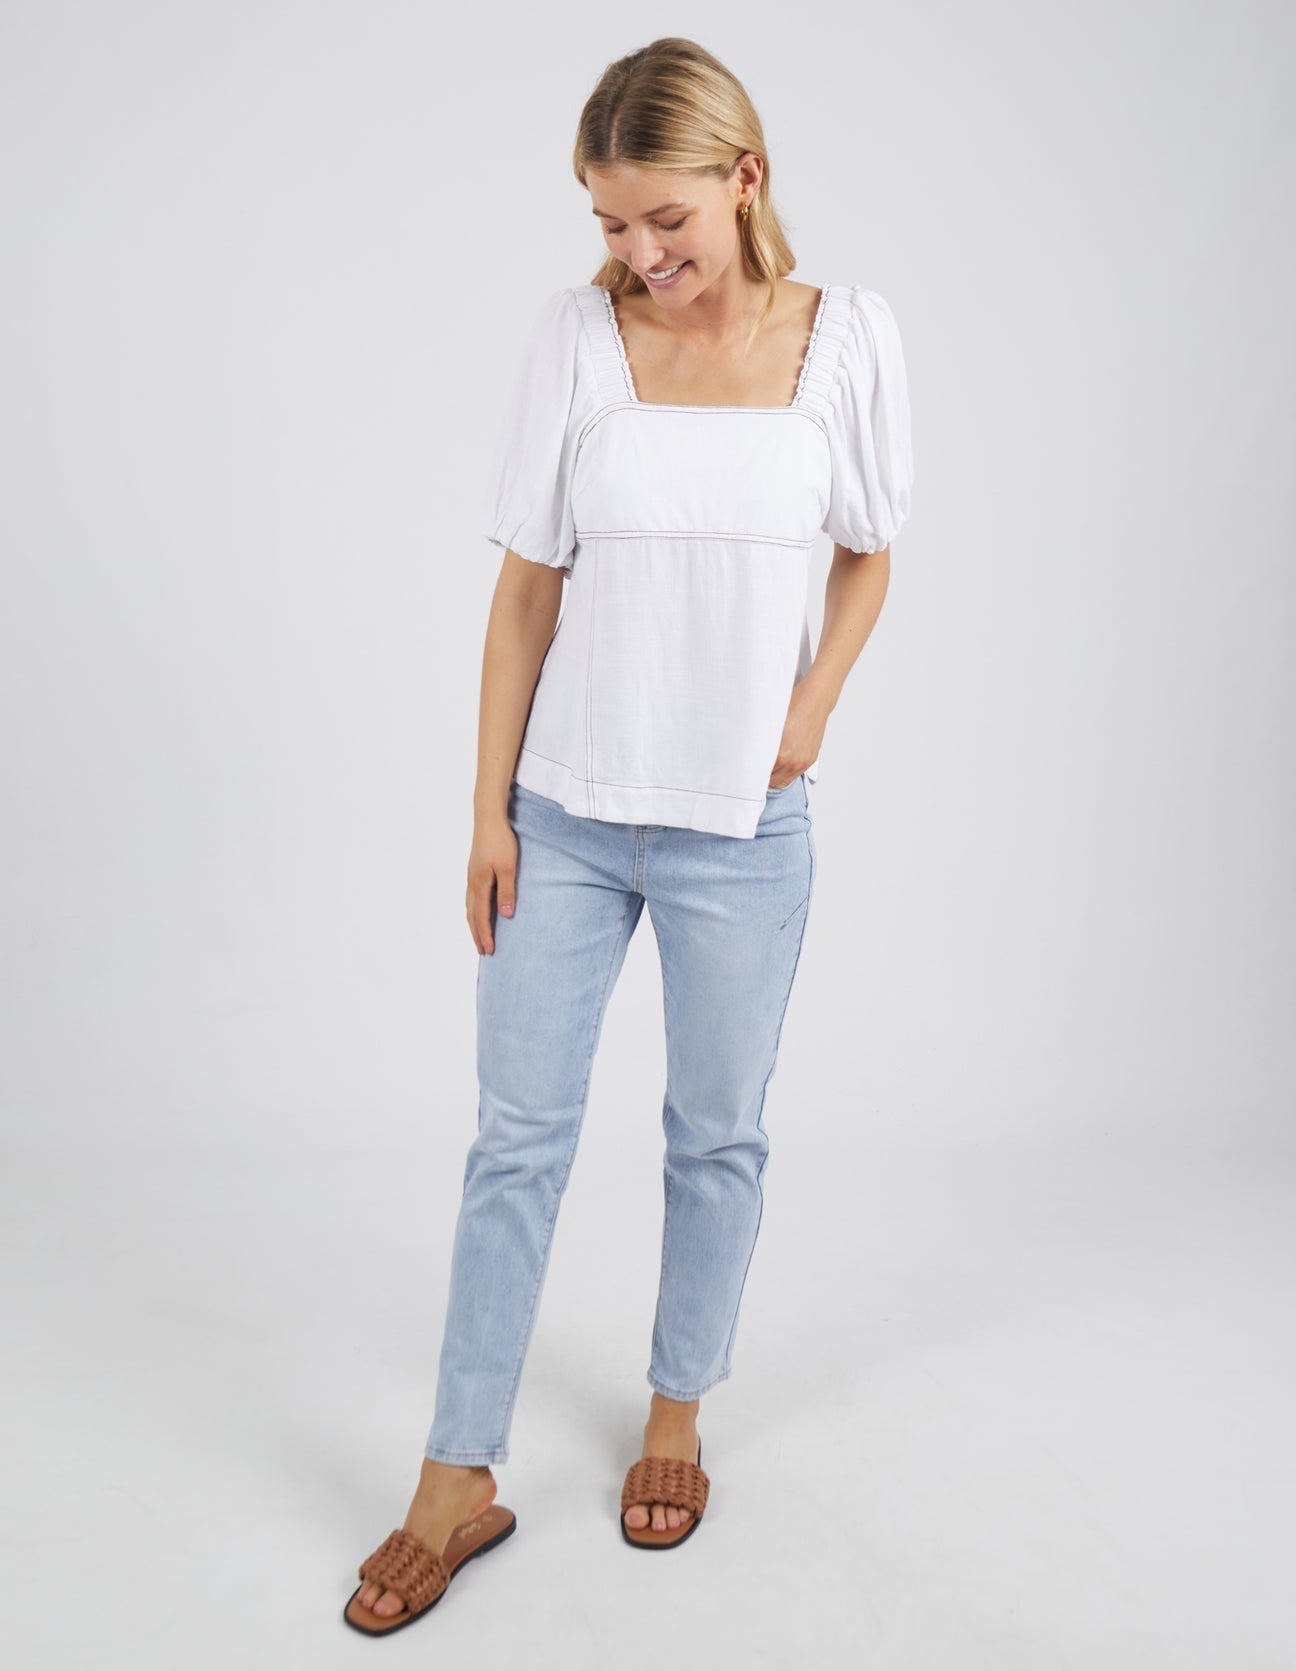 Foxwood Florence white top